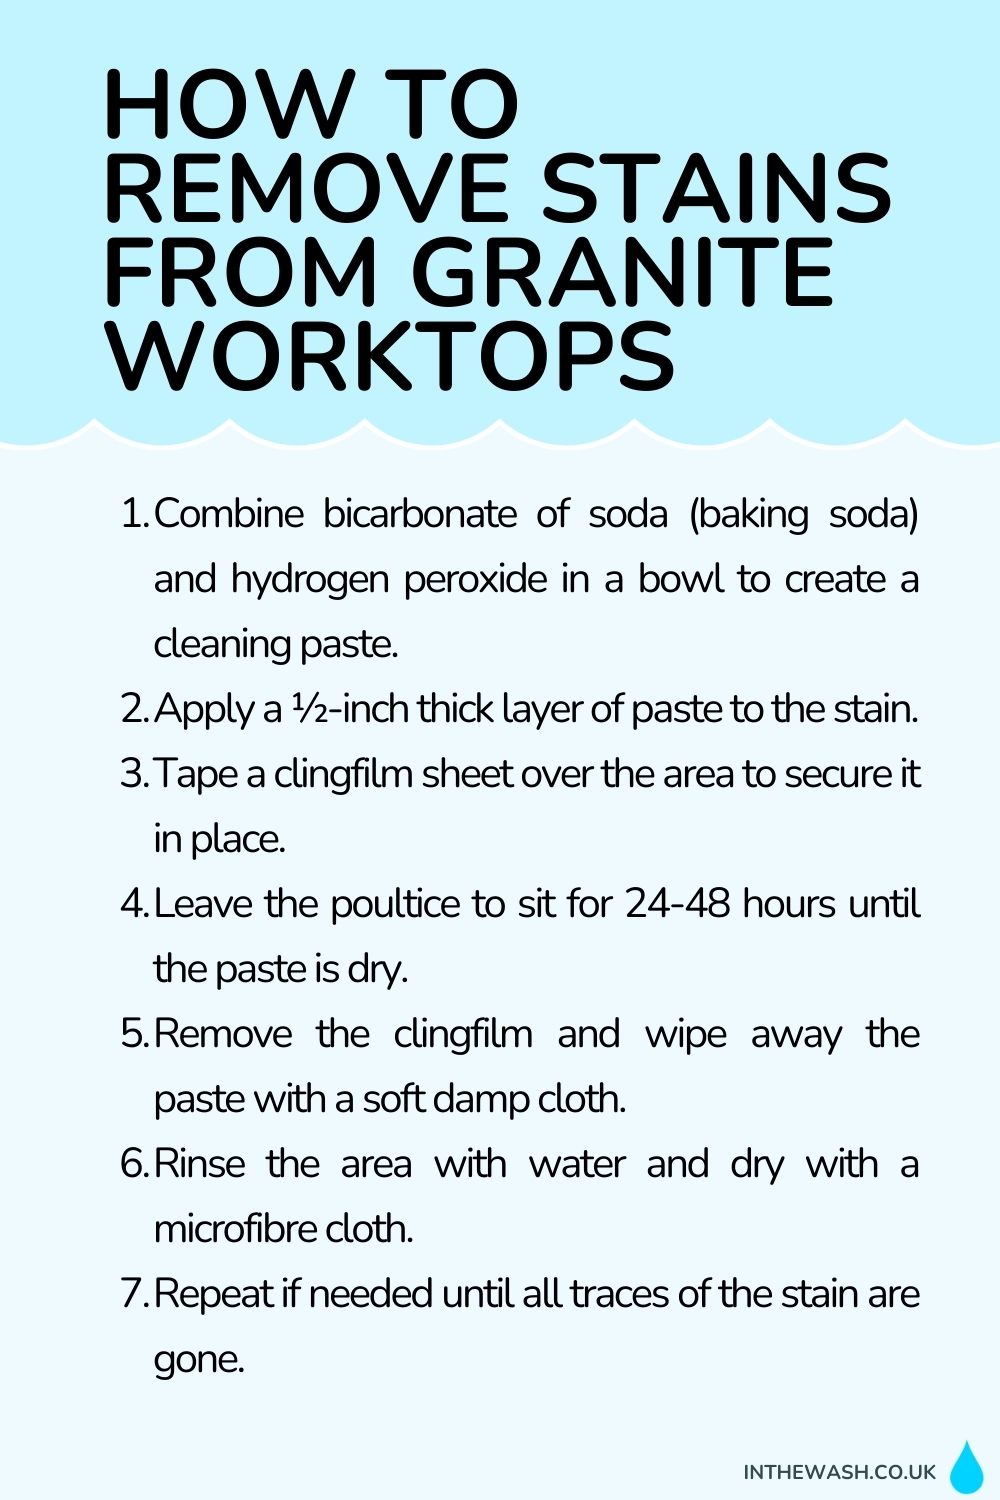 Howt to remove stains from granite worktops